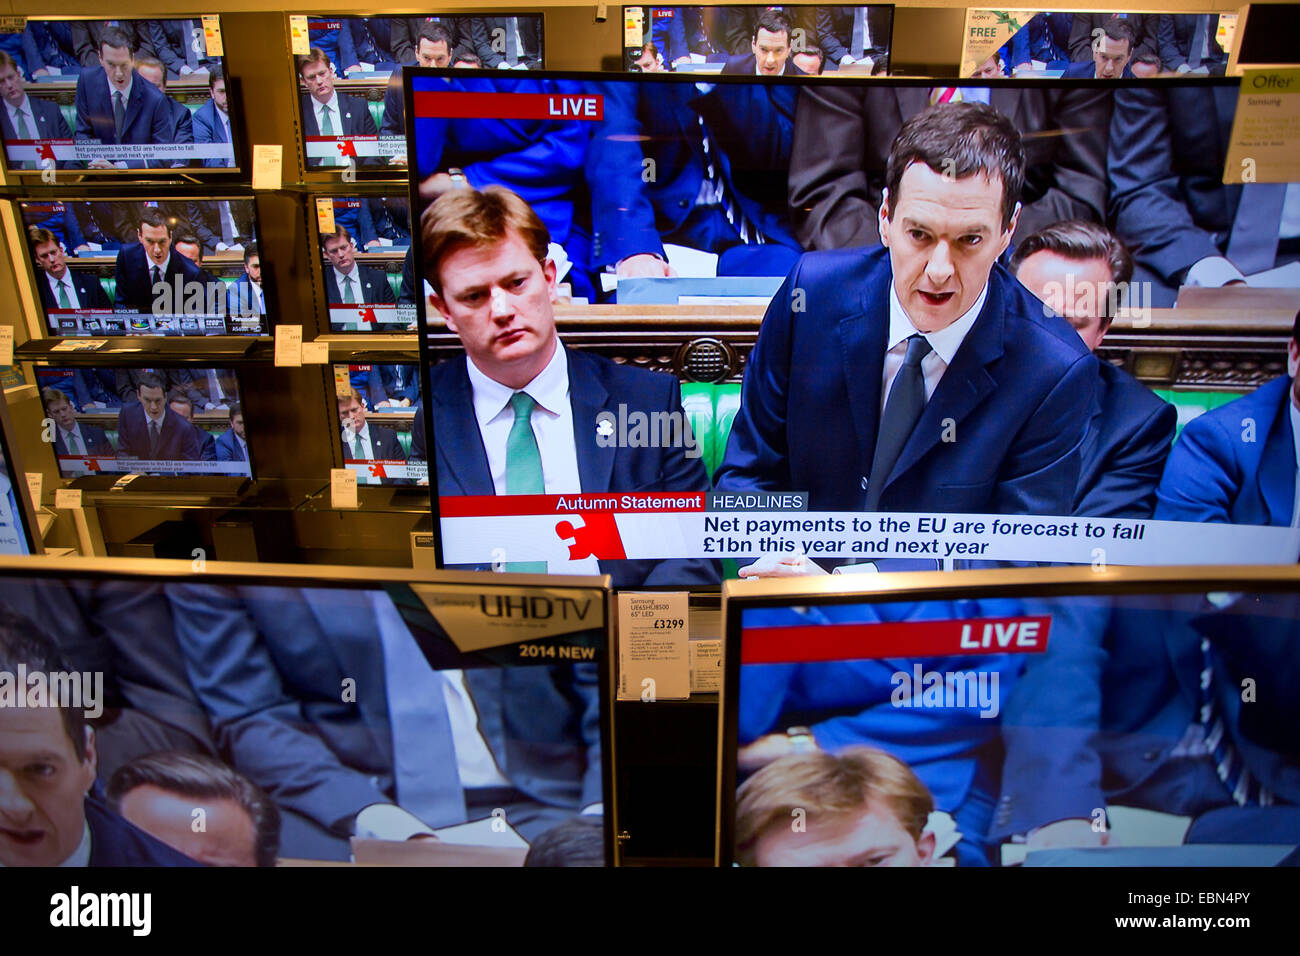 Autumn Statement 3rd December 2014, London, UK Picture shows George Osborne, Chancellor of the Exchequer delivering his Autumn Statement to the House of Commons shown on multiple televisions in a central London department store. Stock Photo